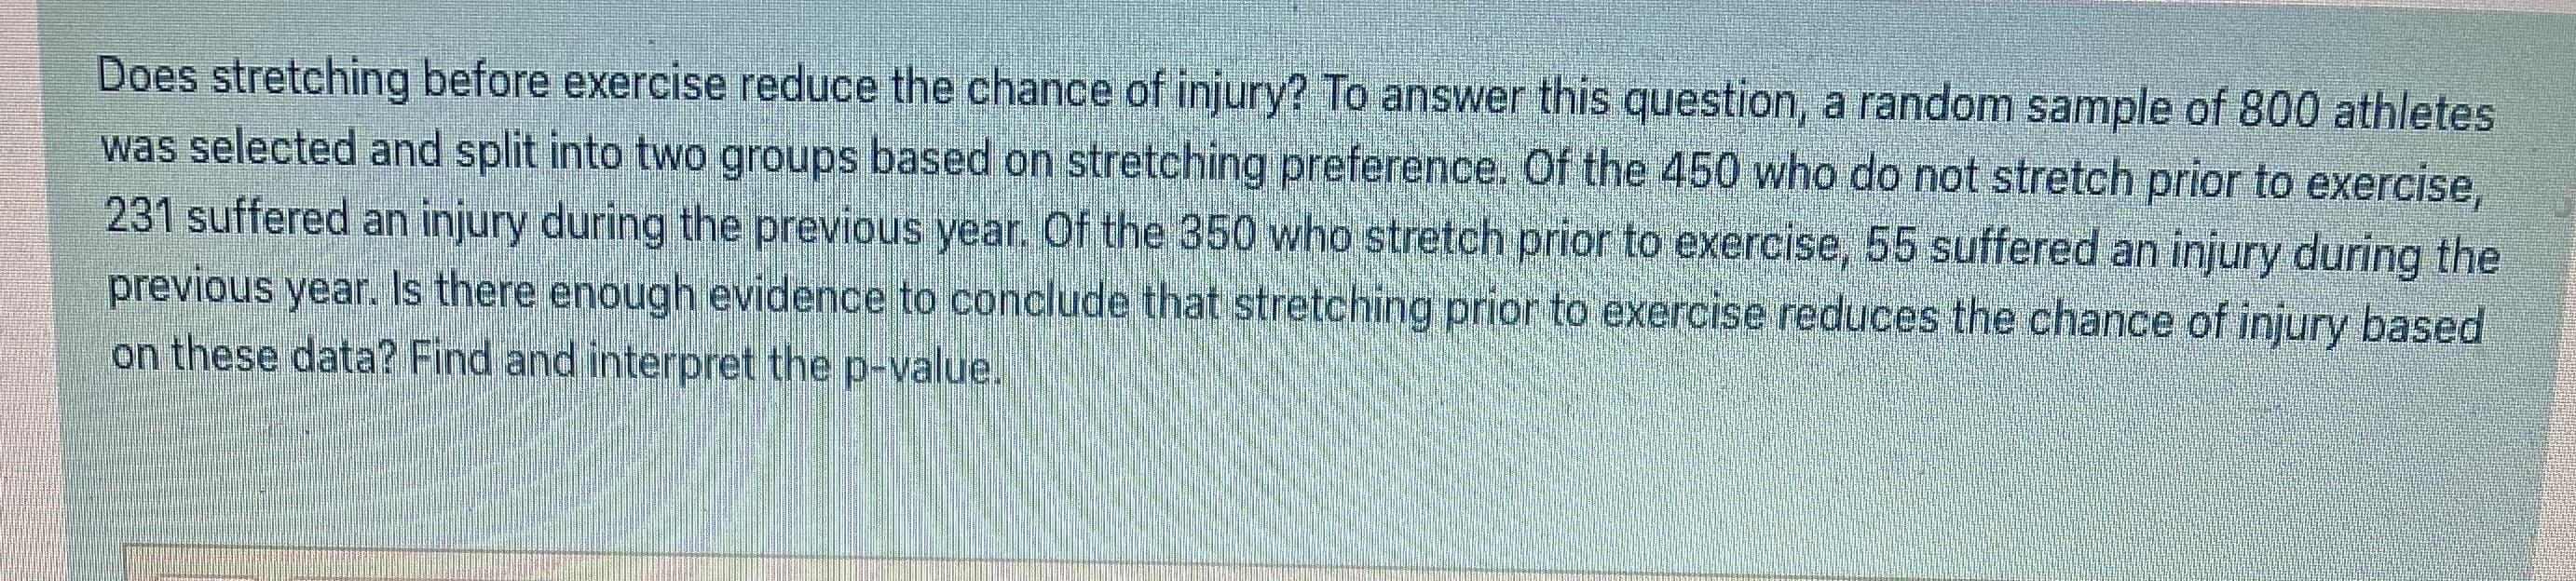 Does stretching before exercise reduce the chance of injury? To answer this question, a random sample of 800 athletes
was selected and split into two groups based on stretching preference. Of the 450 who do not stretch prior to exercise,
231 suffered an injury during the previous year. Of the 350 who stretch prior to exercise, 55 suffered an injury during the
previous year. Is there enough evidence to conclude that stretching prior to exercise reduces the chance of injury based
on these data? Find and interpret the p-value.
